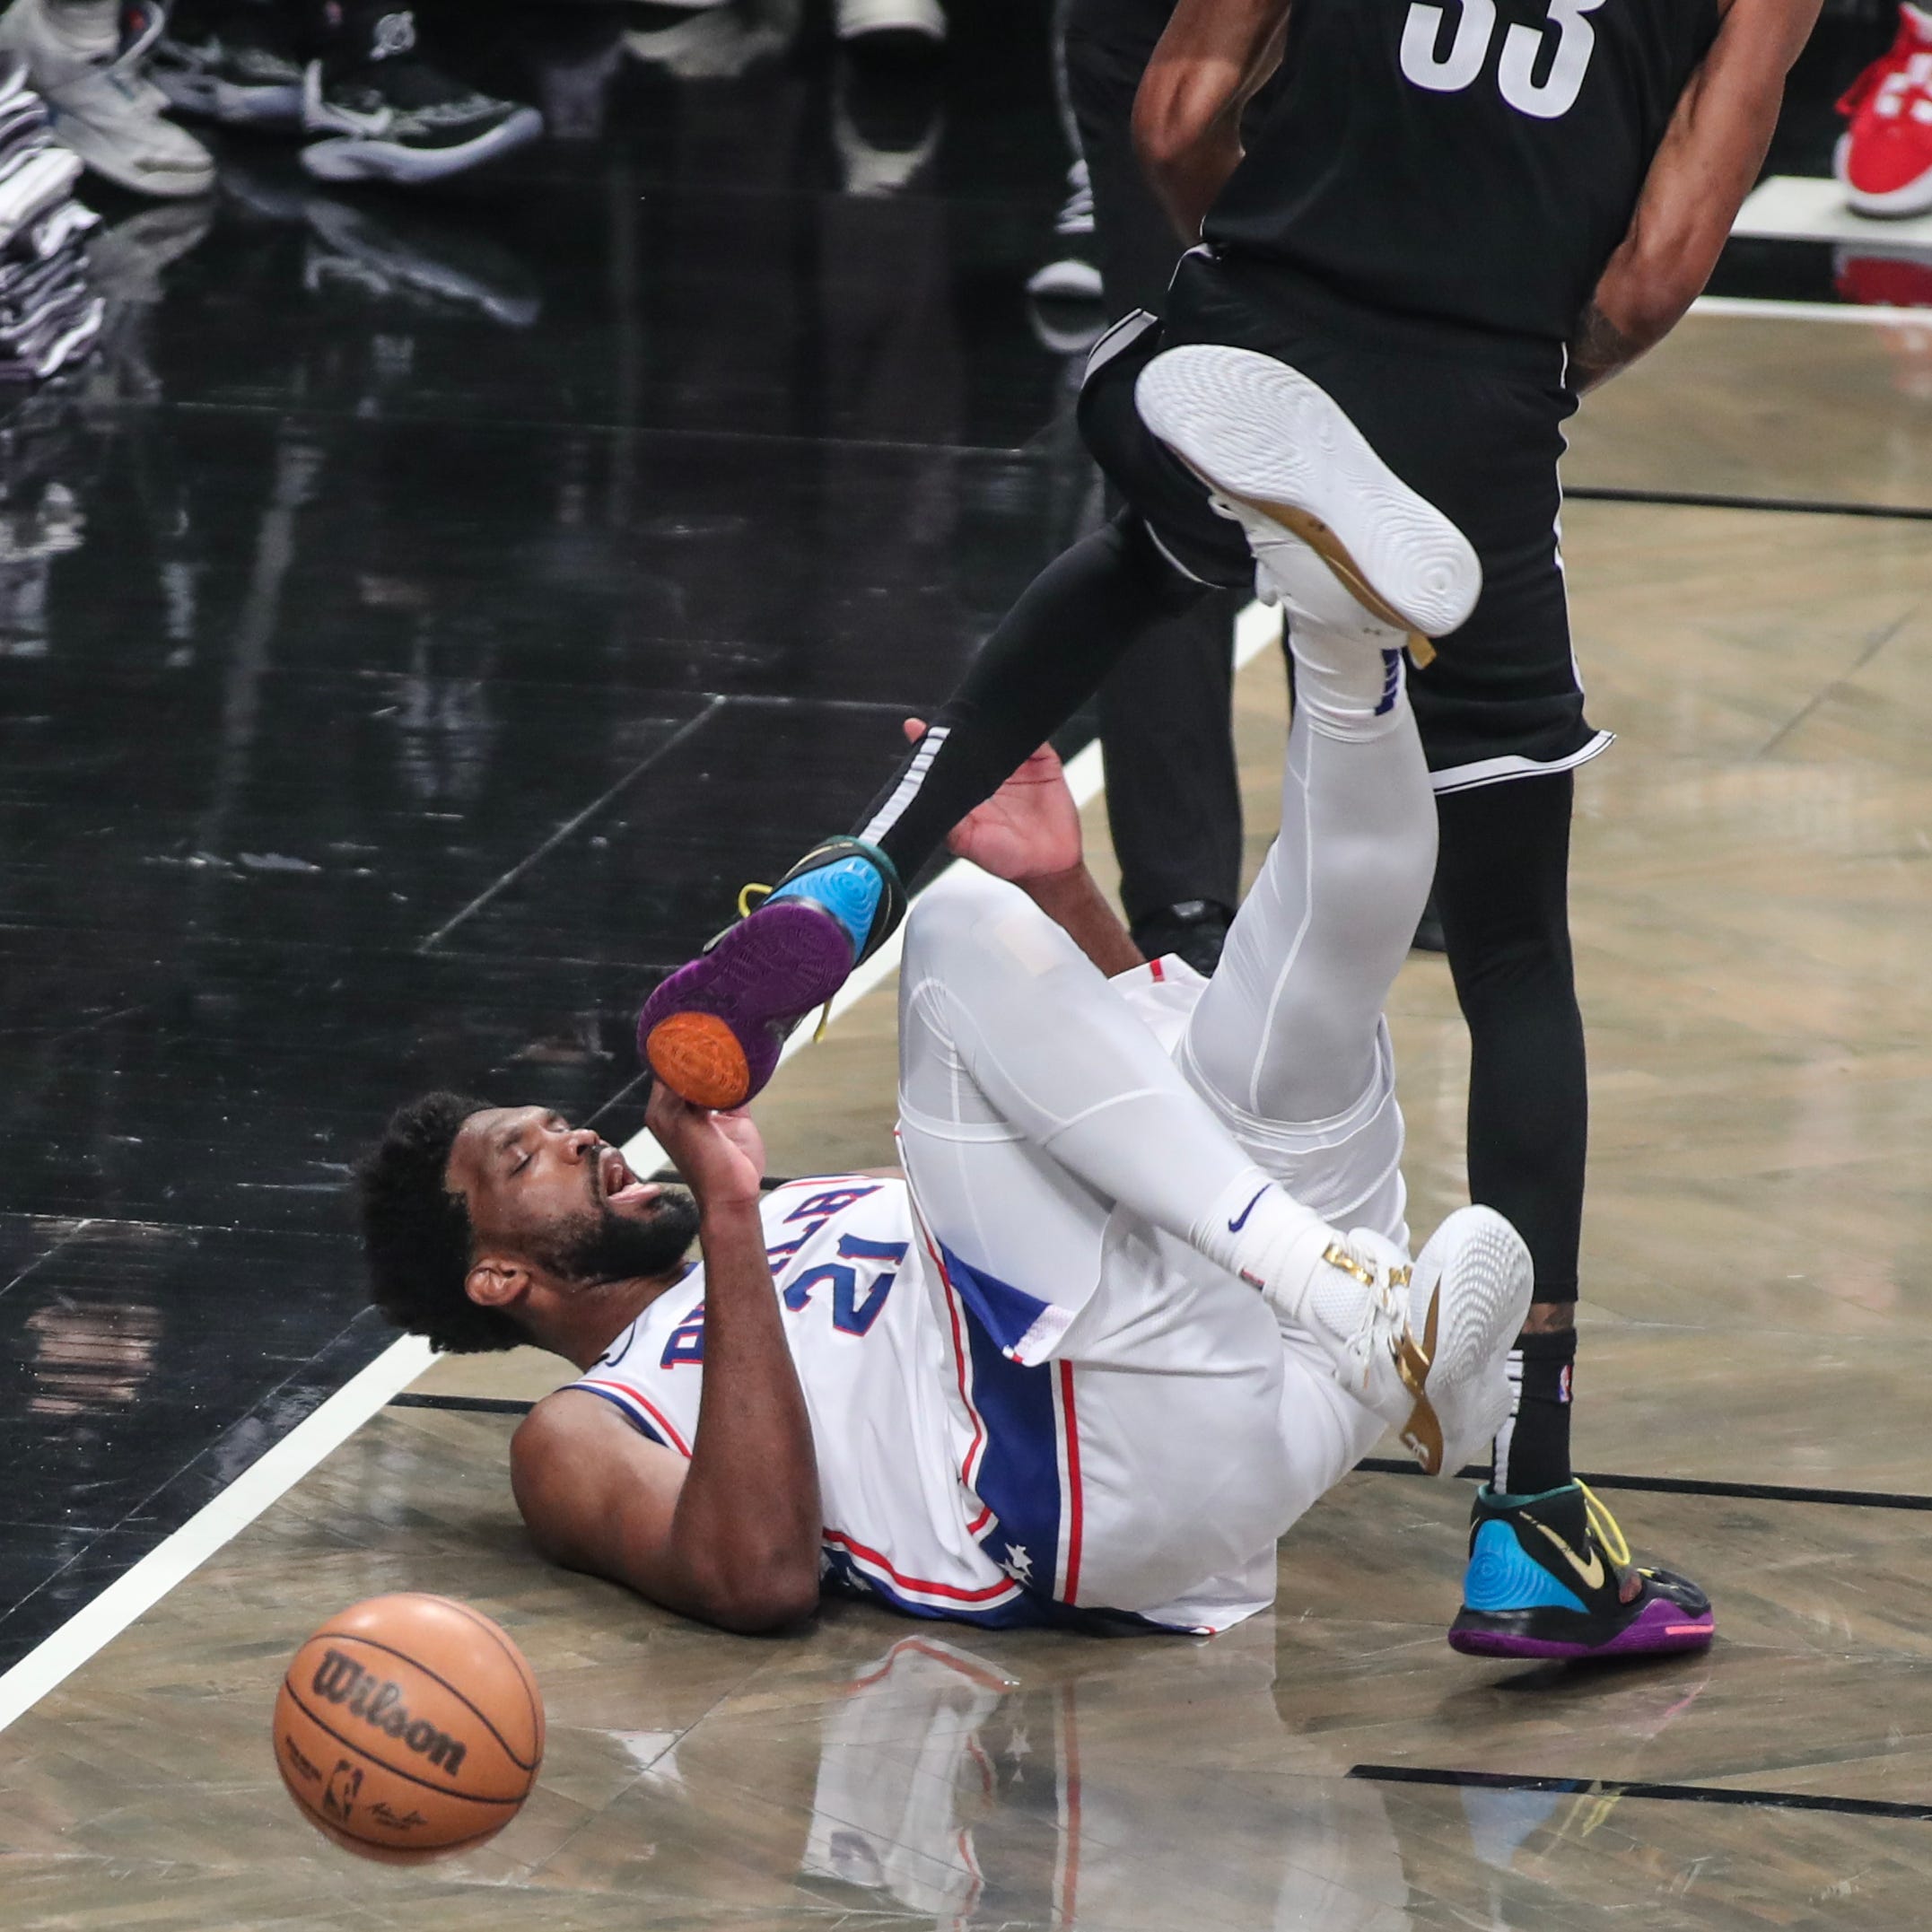 Philadelphia 76ers center Joel Embiid and the Nets' Nic Claxton got into a dust-up in the first quarter.